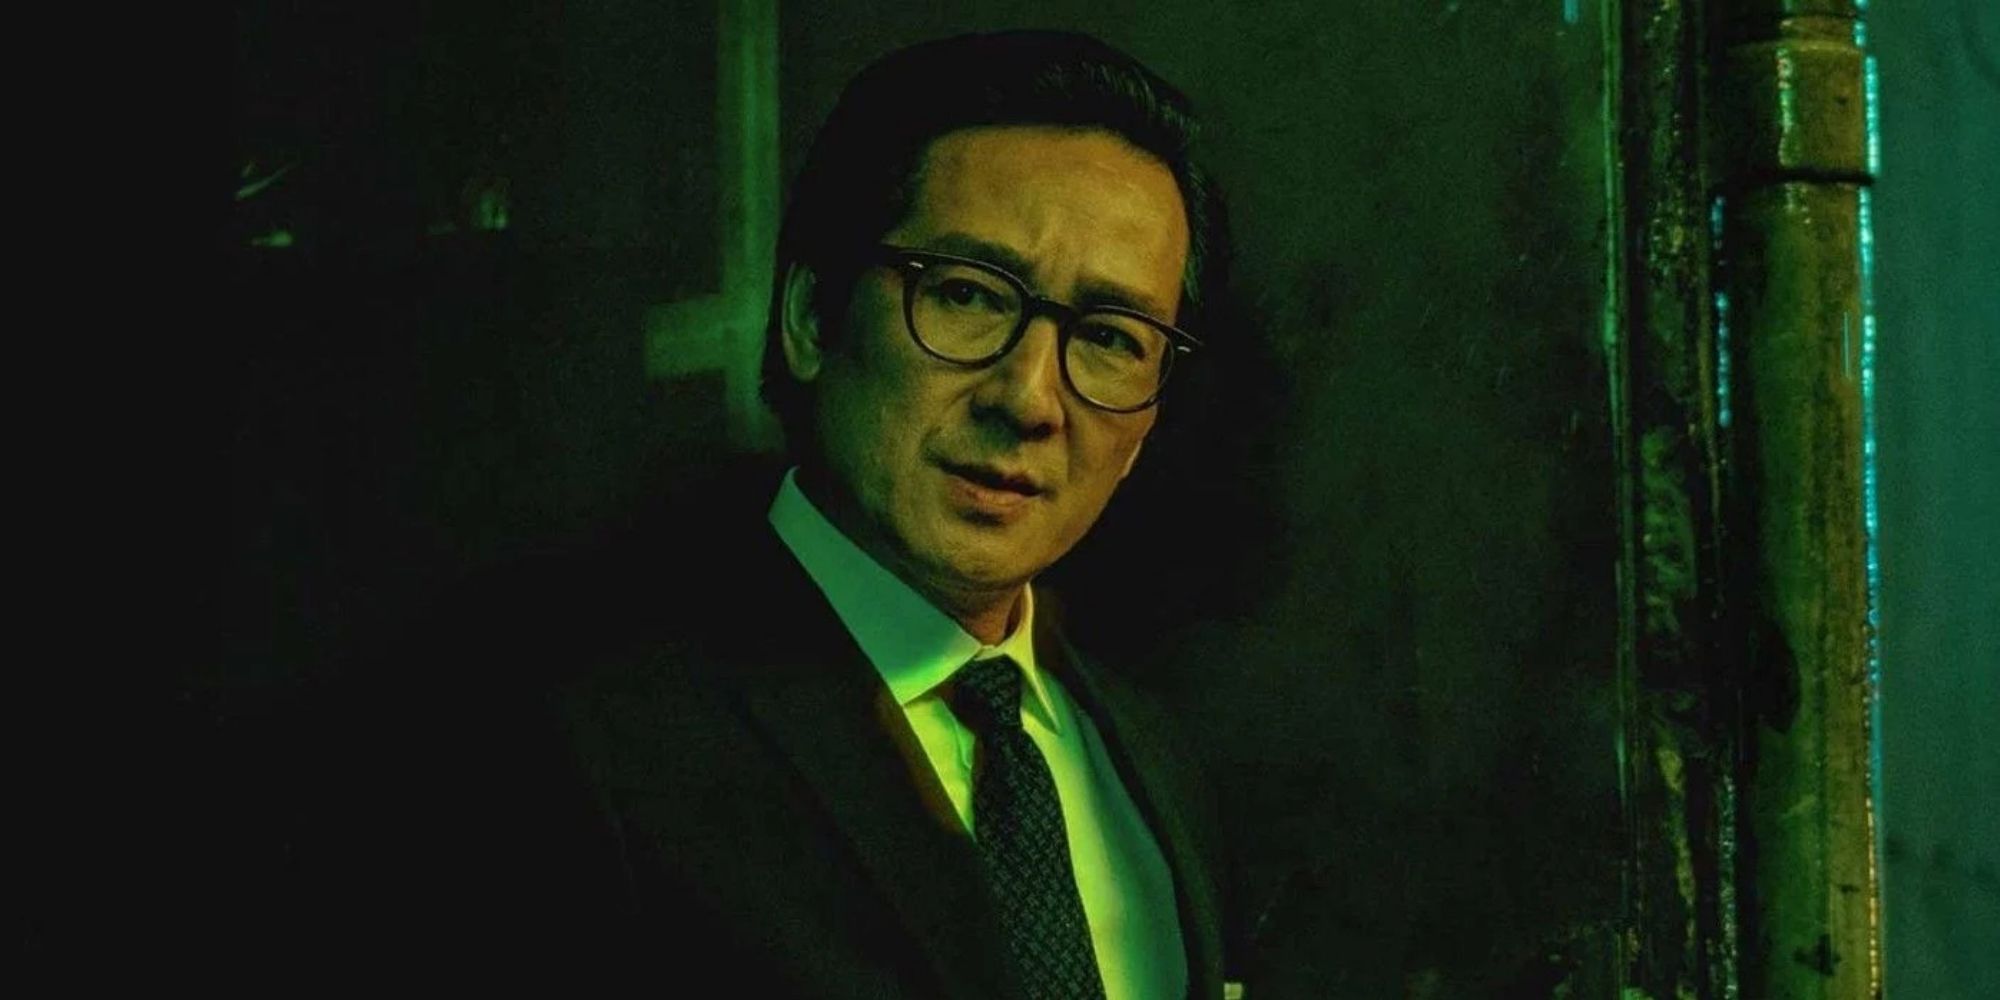 Waymond Wang (Ke Huy Quan) en homme d'affaires dans 'Everything Everywhere All At Once' (2022).